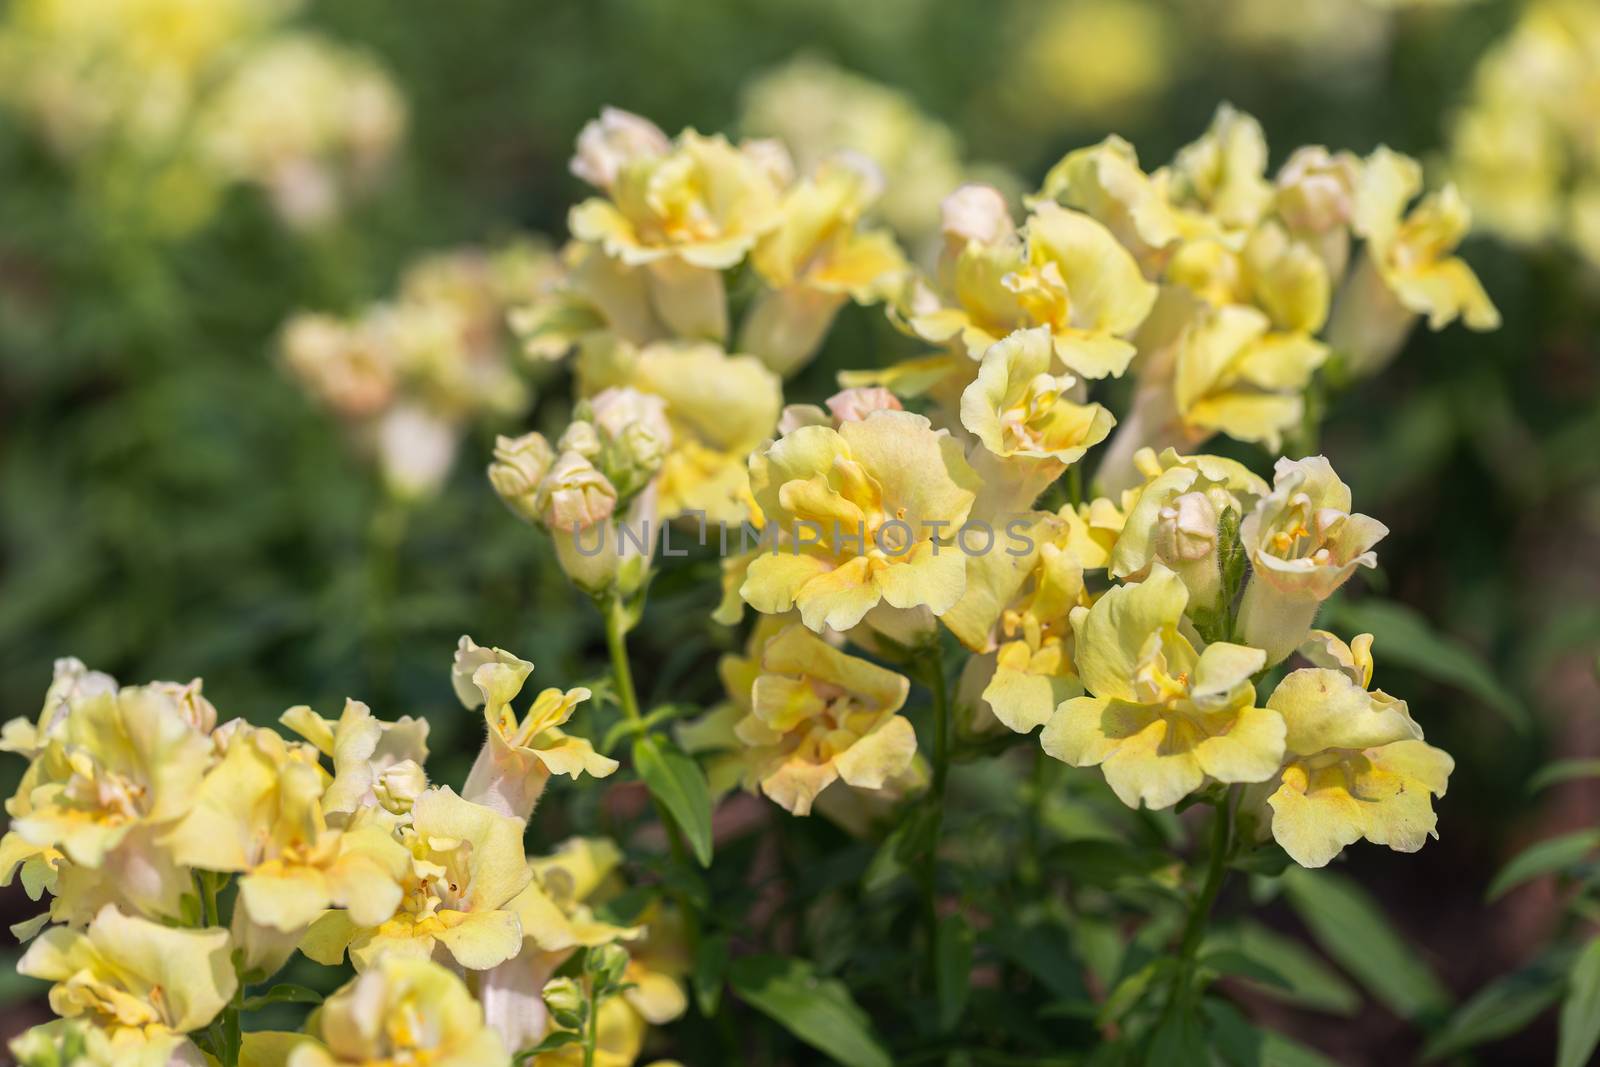 Snapdragon flower and green leaf in garden at sunny summer or spring day by phanthit